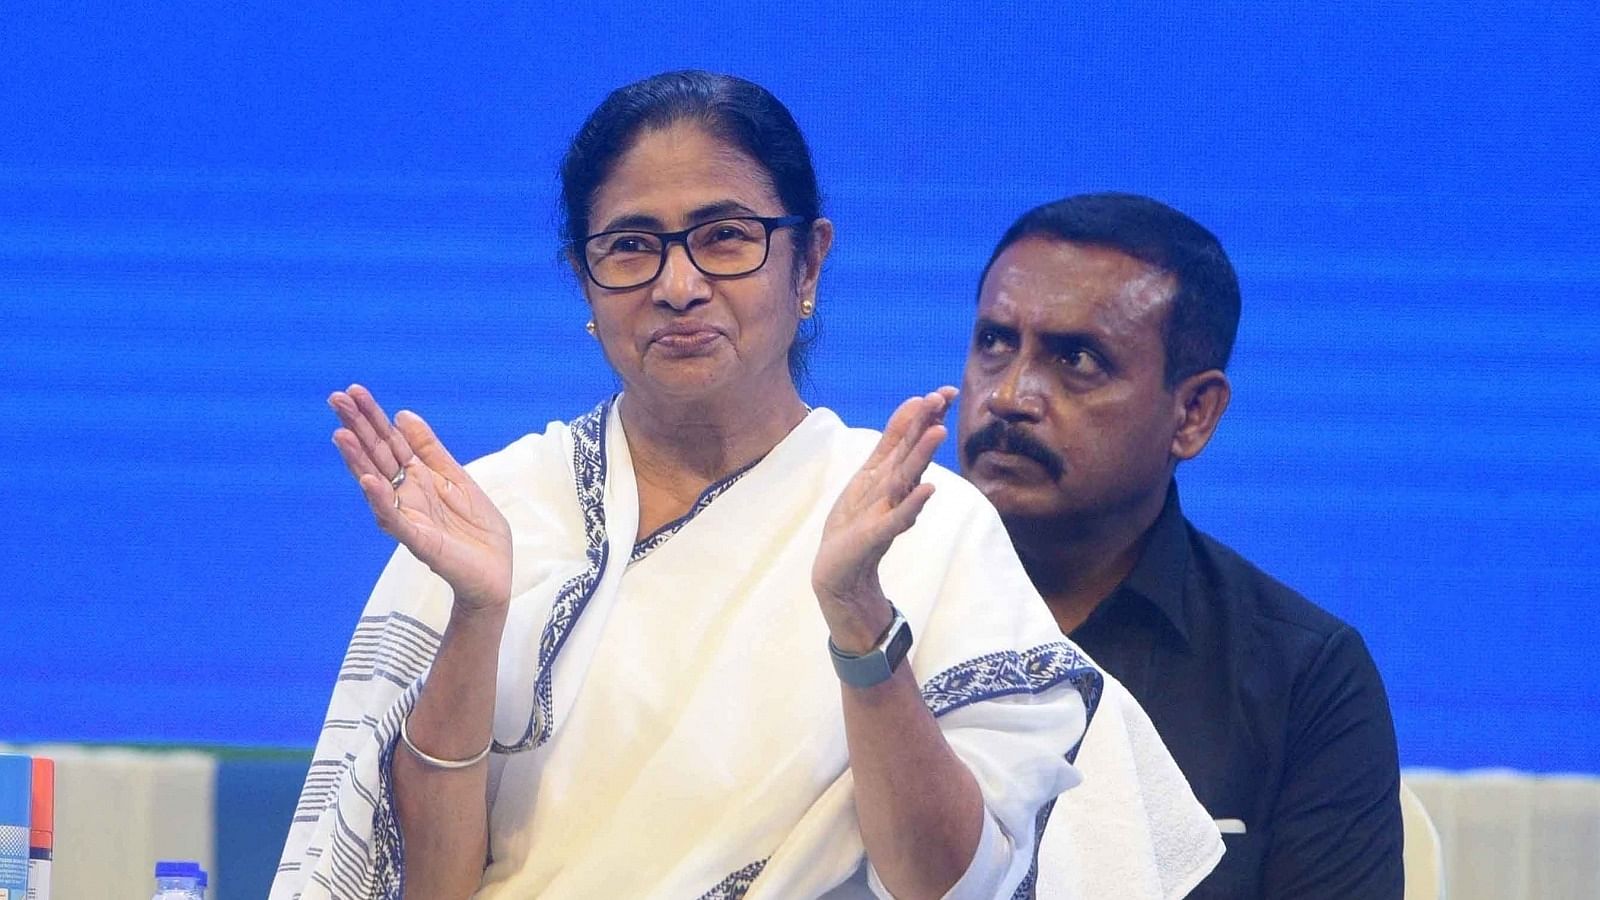 While speaking on a resolution in the West Bengal Assembly on Monday against the "excesses" of the central probe agencies, Banerjee urged the prime minister to ensure that the functioning of the Union government and the interests of his party do not get mixed up. Credit: IANS Photo